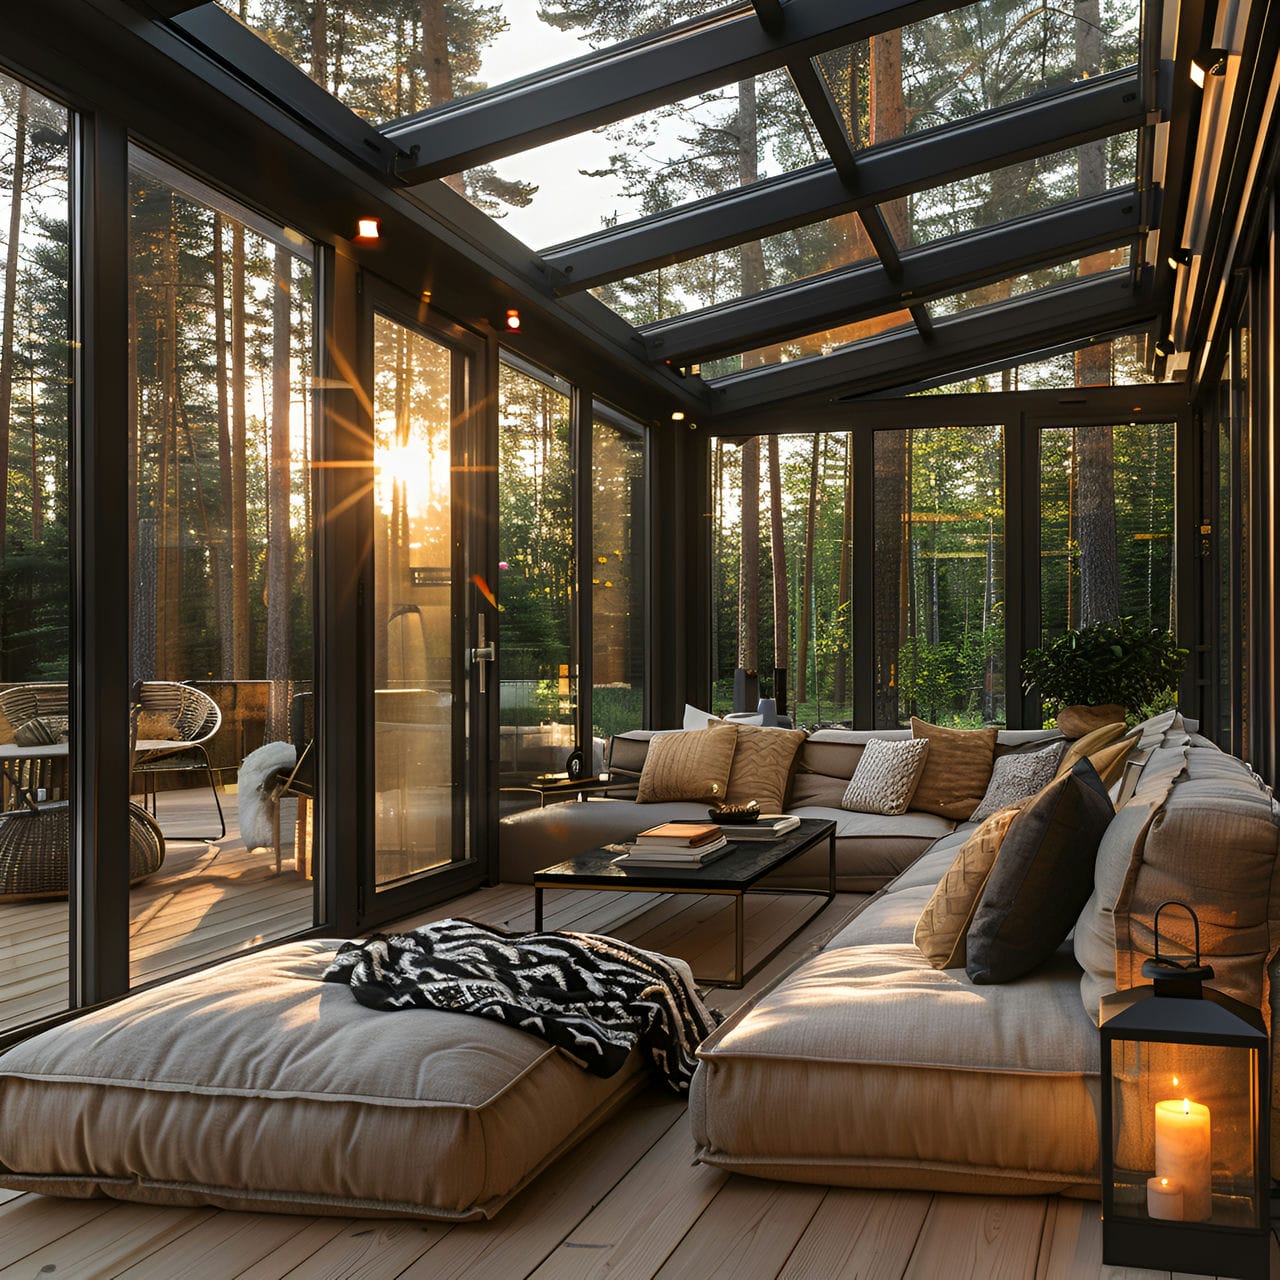 Conservatory: size, functionality, uses, furniture, and renovation